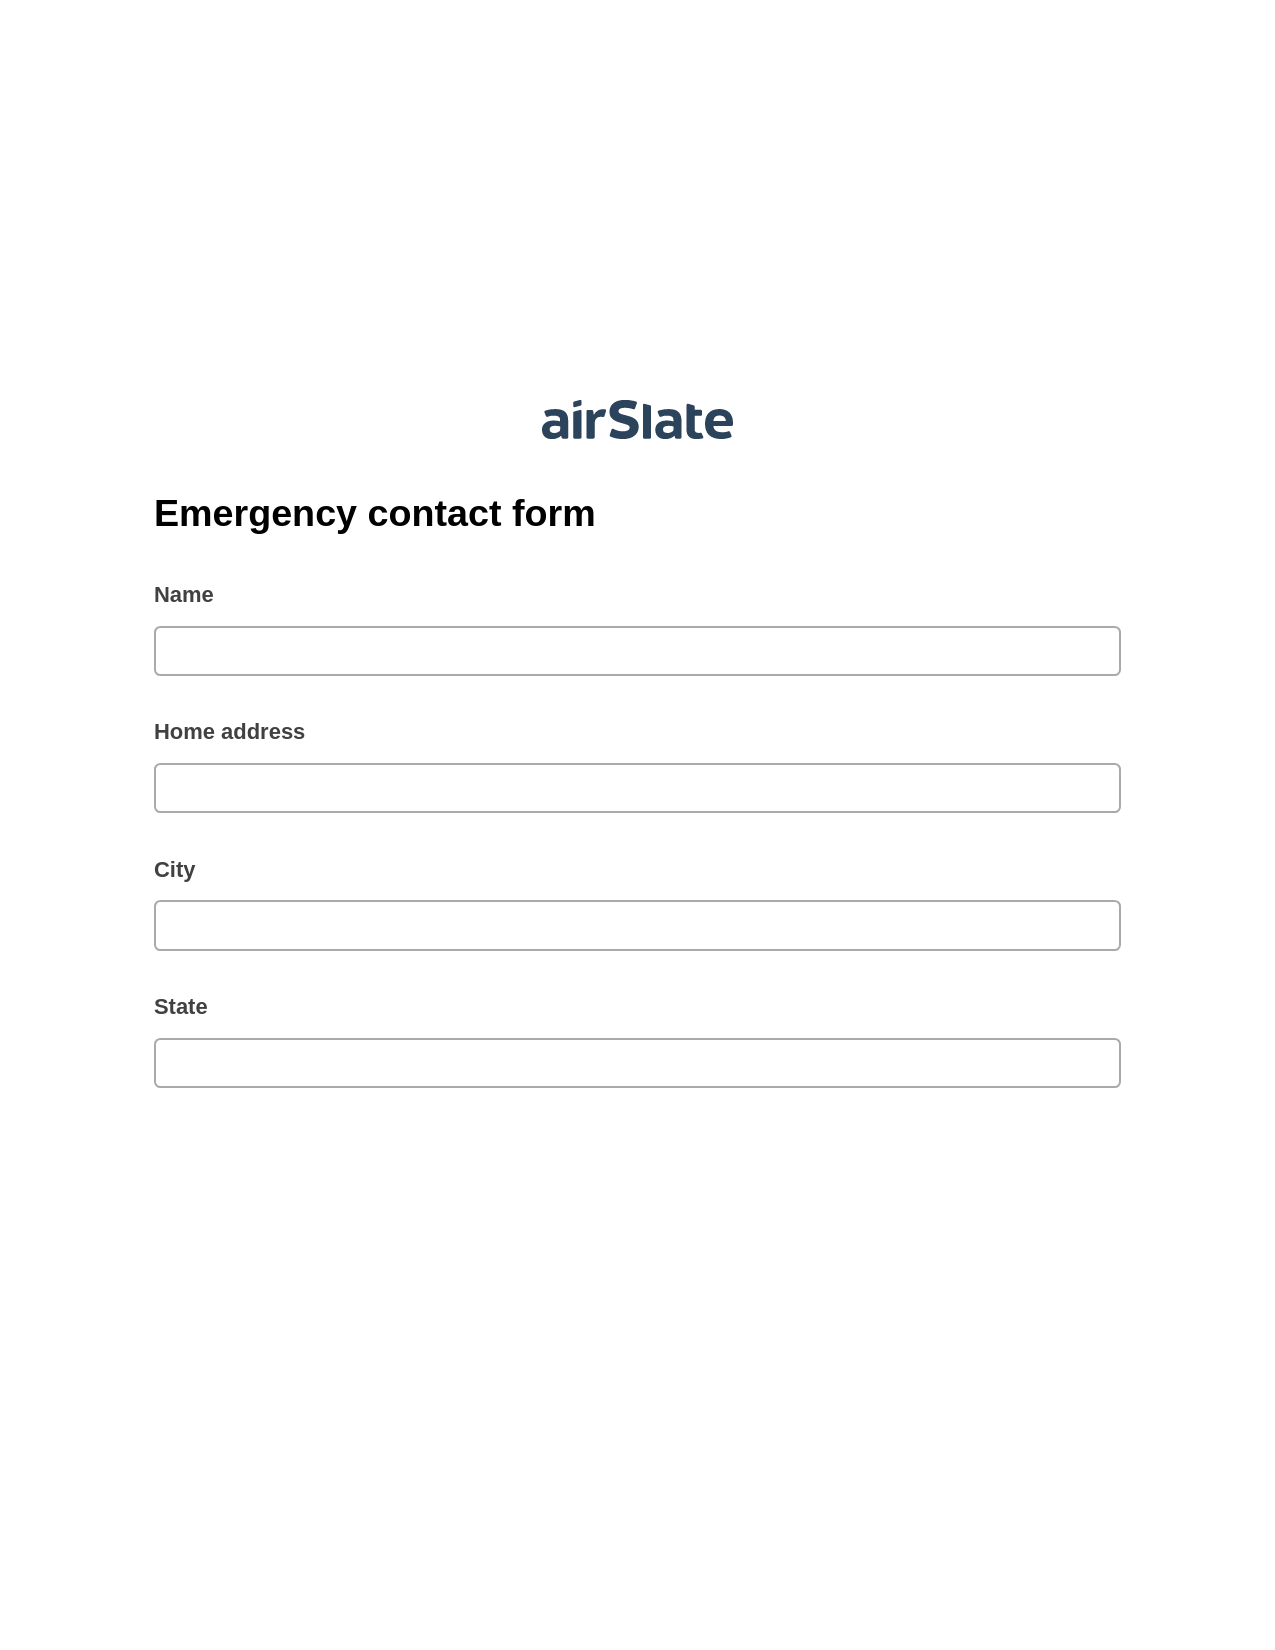 Multirole Emergency contact form Pre-fill from Google Sheet Dropdown Options Bot, Update Salesforce Record Bot, Archive to SharePoint Folder Bot